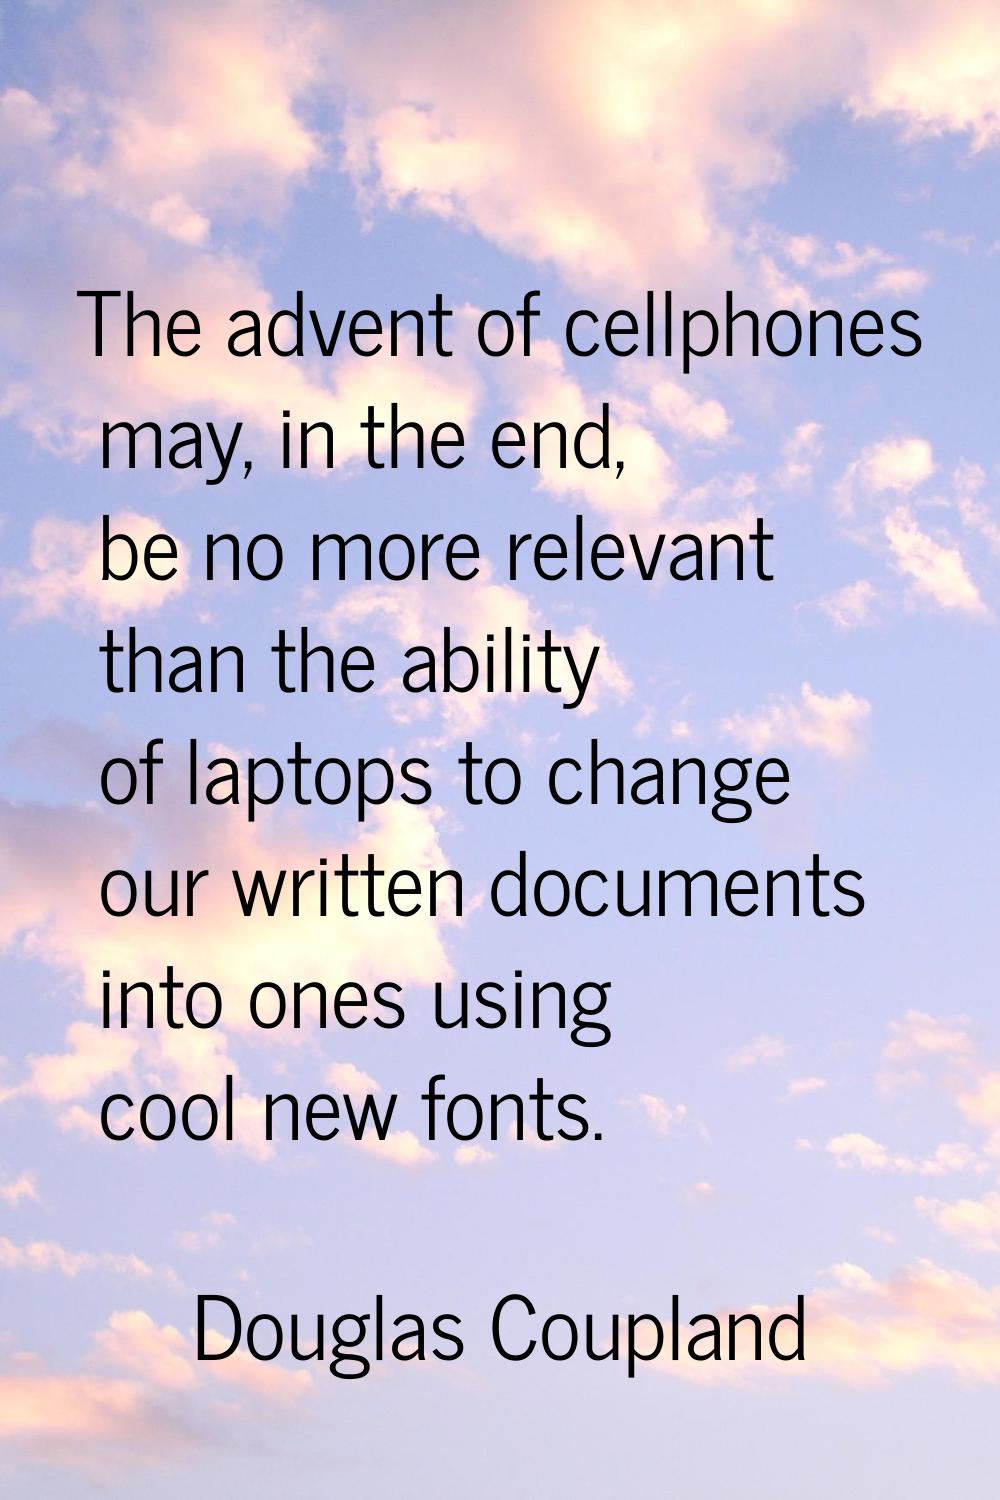 The advent of cellphones may, in the end, be no more relevant than the ability of laptops to change